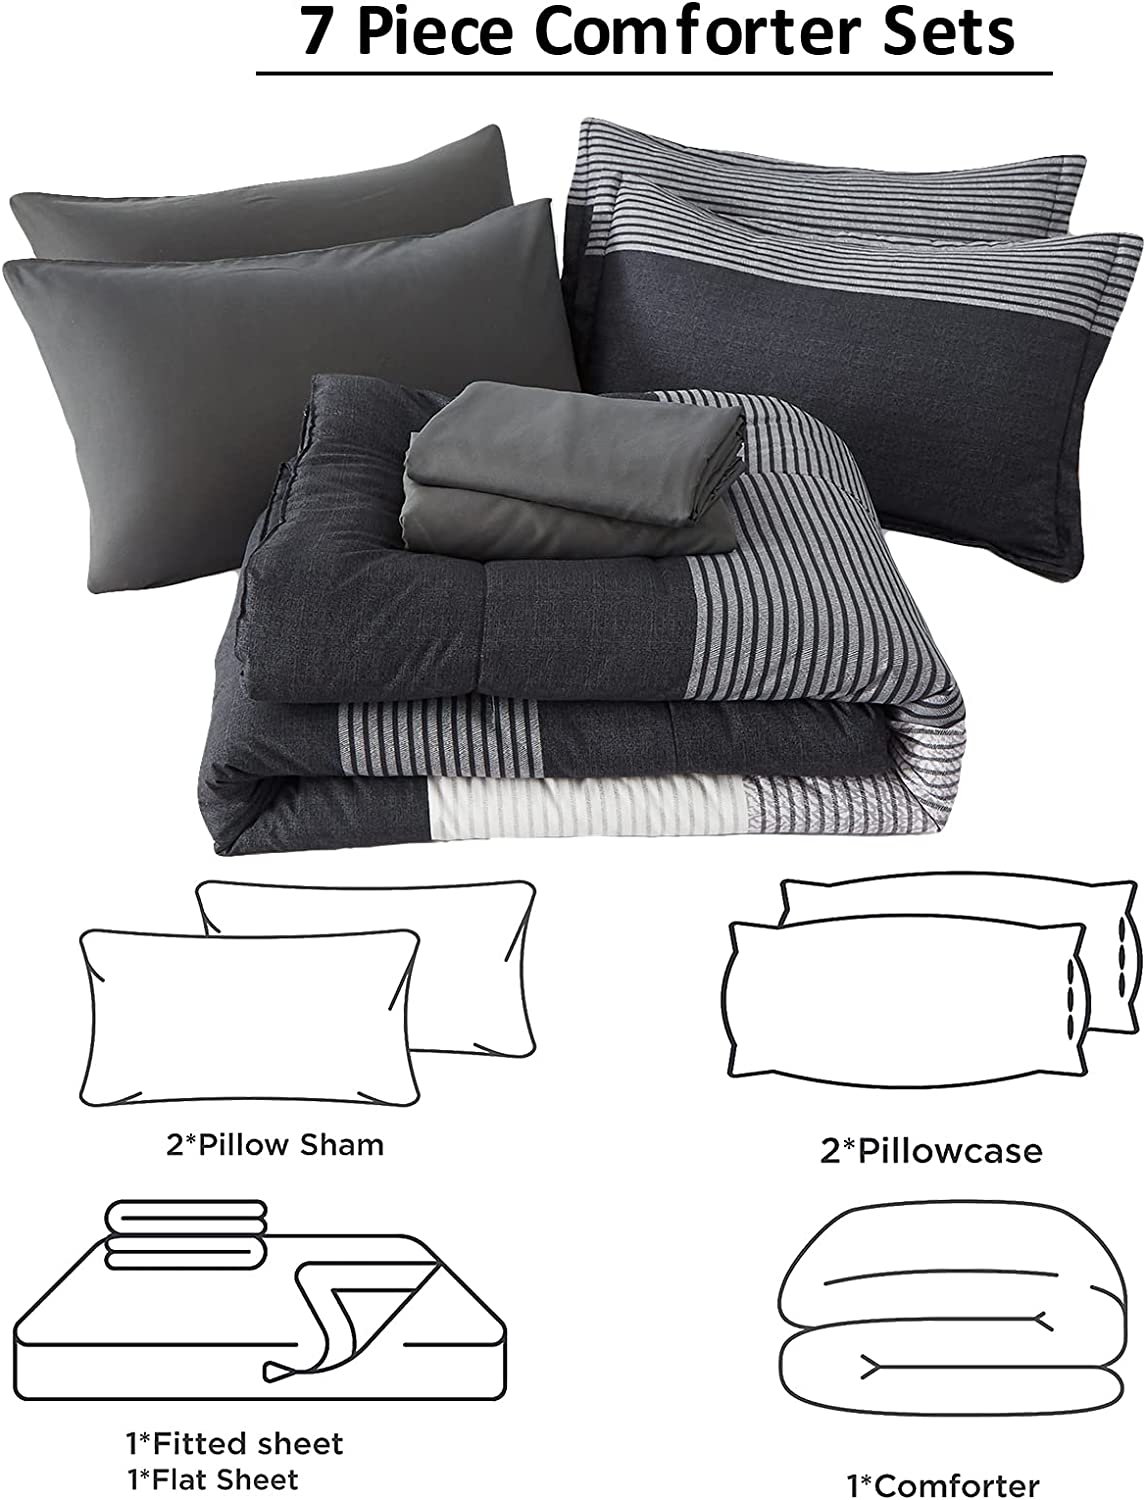 Dark Grey Queen Comforter Set 7 Pieces Stripe Comforter Sets with Comforter, Pillowshams, Flat Sheet, Fitted Sheet and Pillowcases